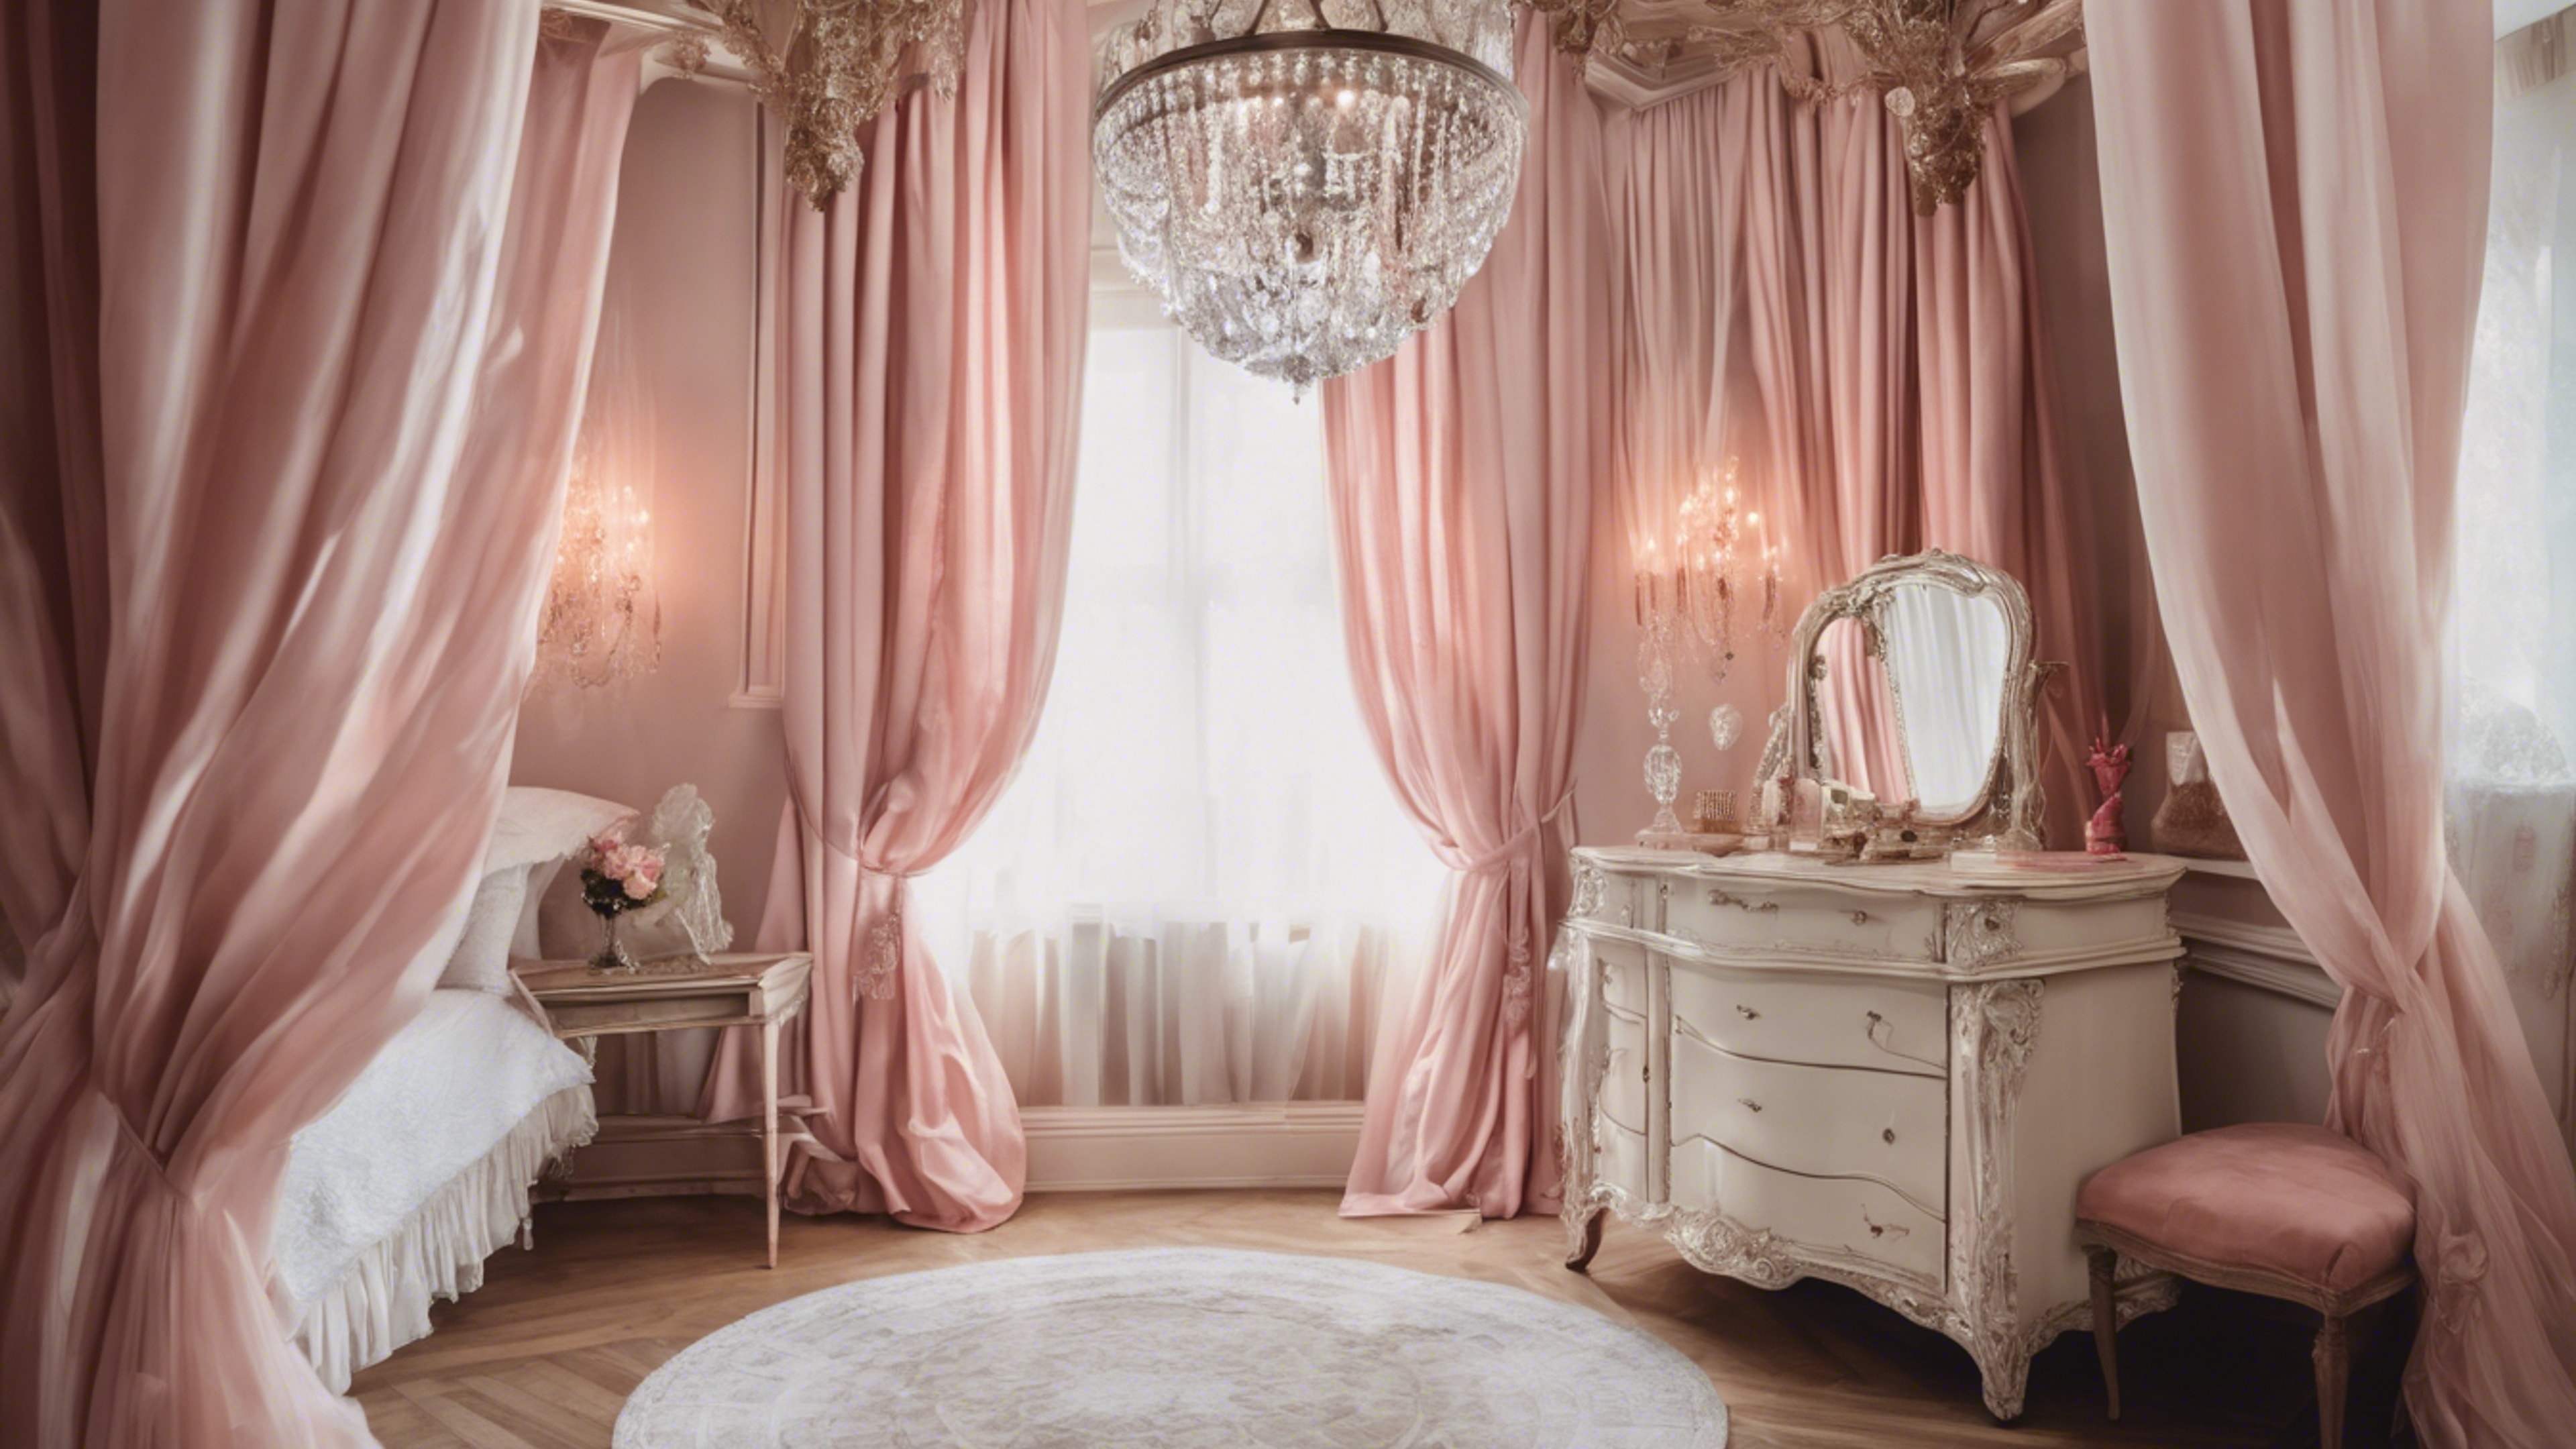 A feminine French bedroom, with canopy bed draped in soft-pink curtains, crystal chandelier hanging overhead, and an elegant antique vanity. Papel de parede[9a96ceac1df24dd59ae9]